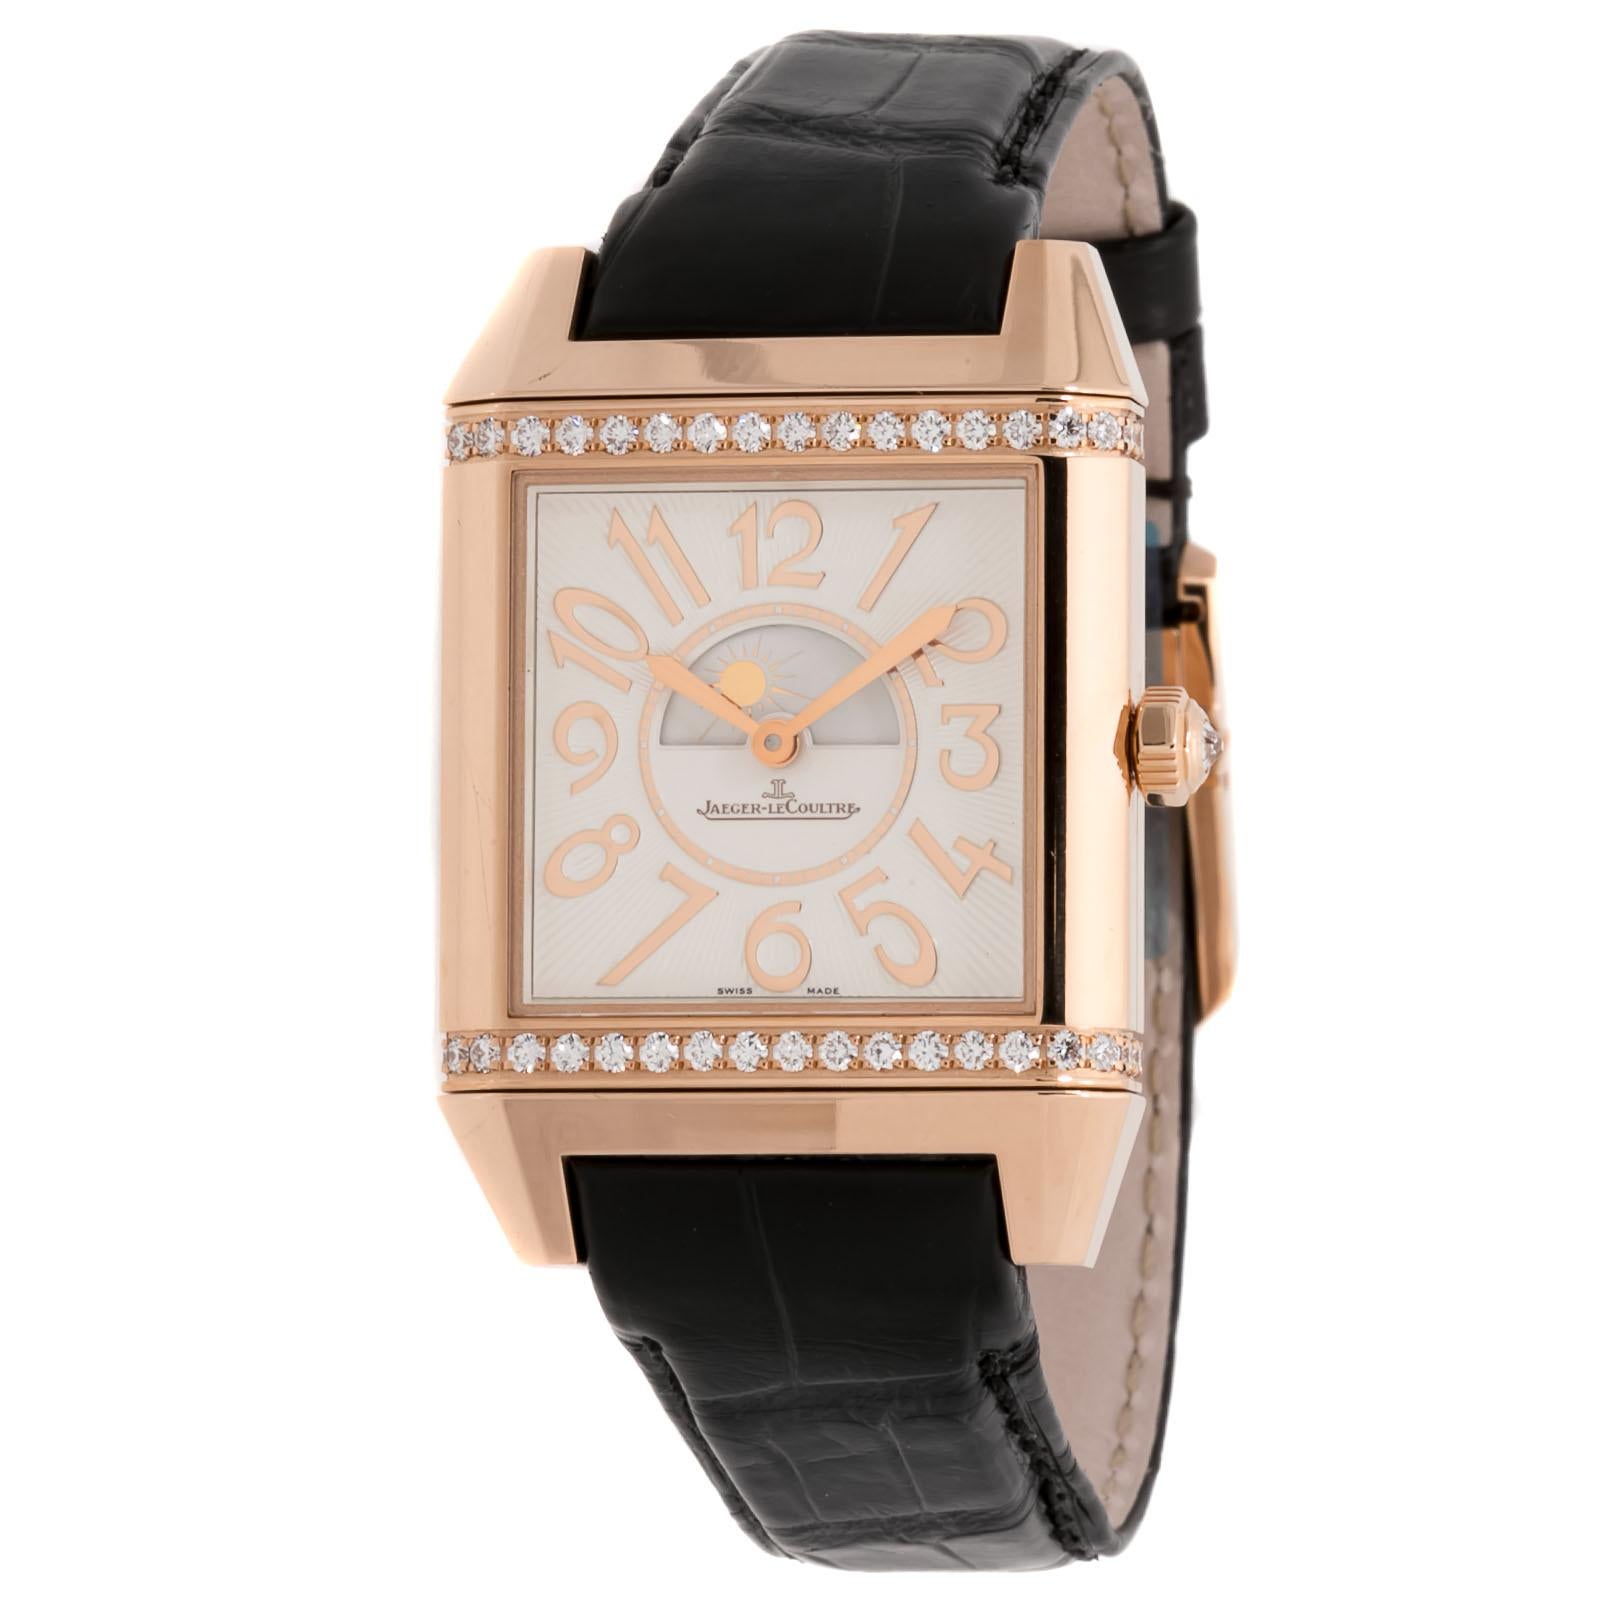 Jaeger-LeCoultre Reverso Squadra Lady Duetto Silvered Guilloche/Black Dial Watch For Sale